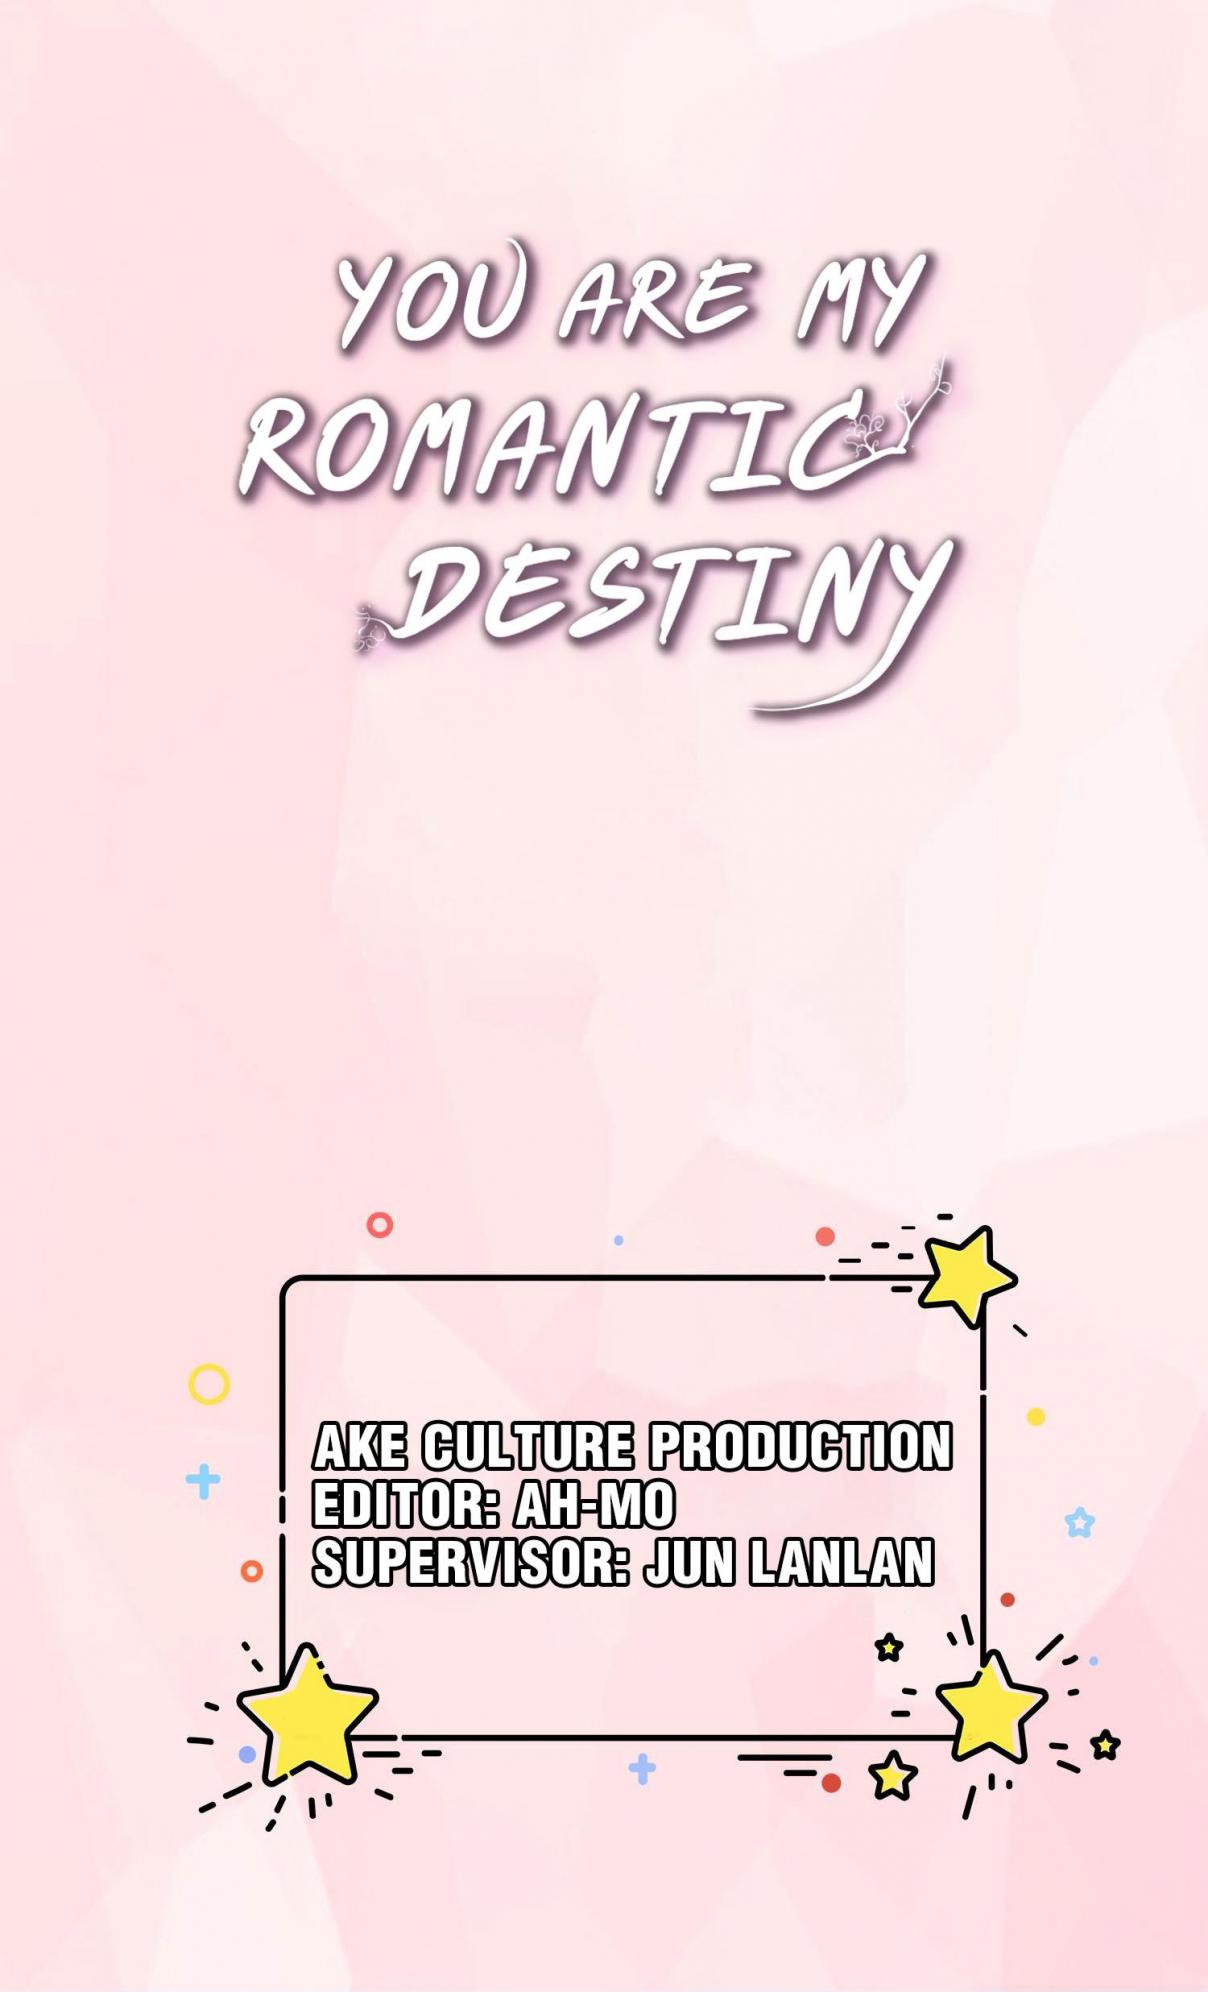 You Are My Romantic Destiny 6 Oh My, It's a Sign of a Crush